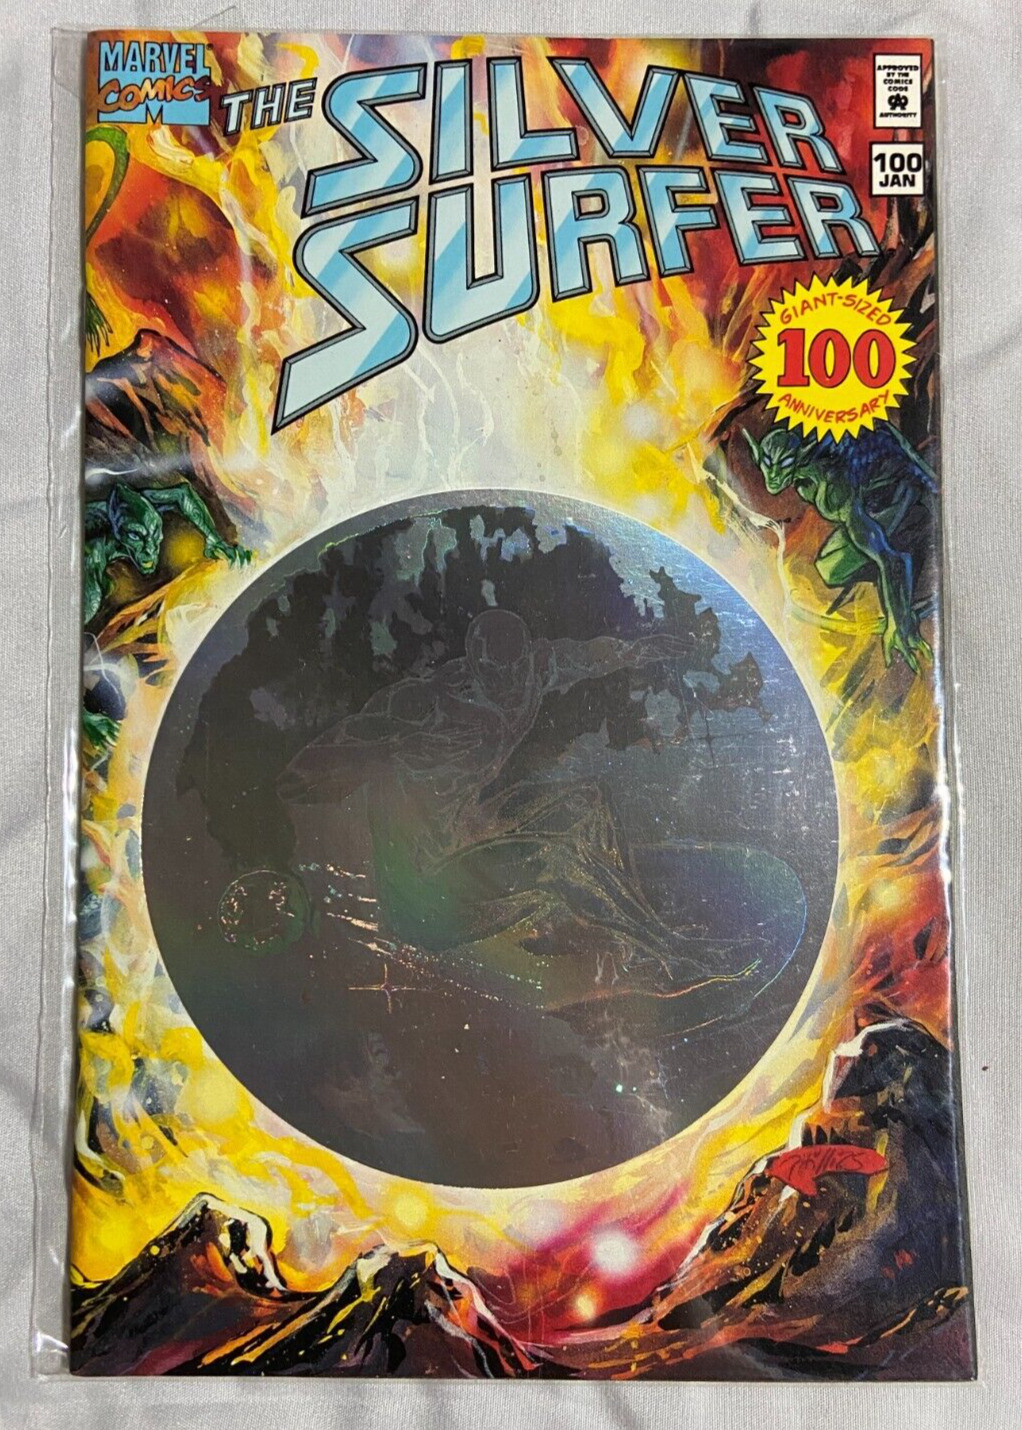 Marvel Comics The Silver Surfer #100 1995 Hologram Cover EXCELLENT condition